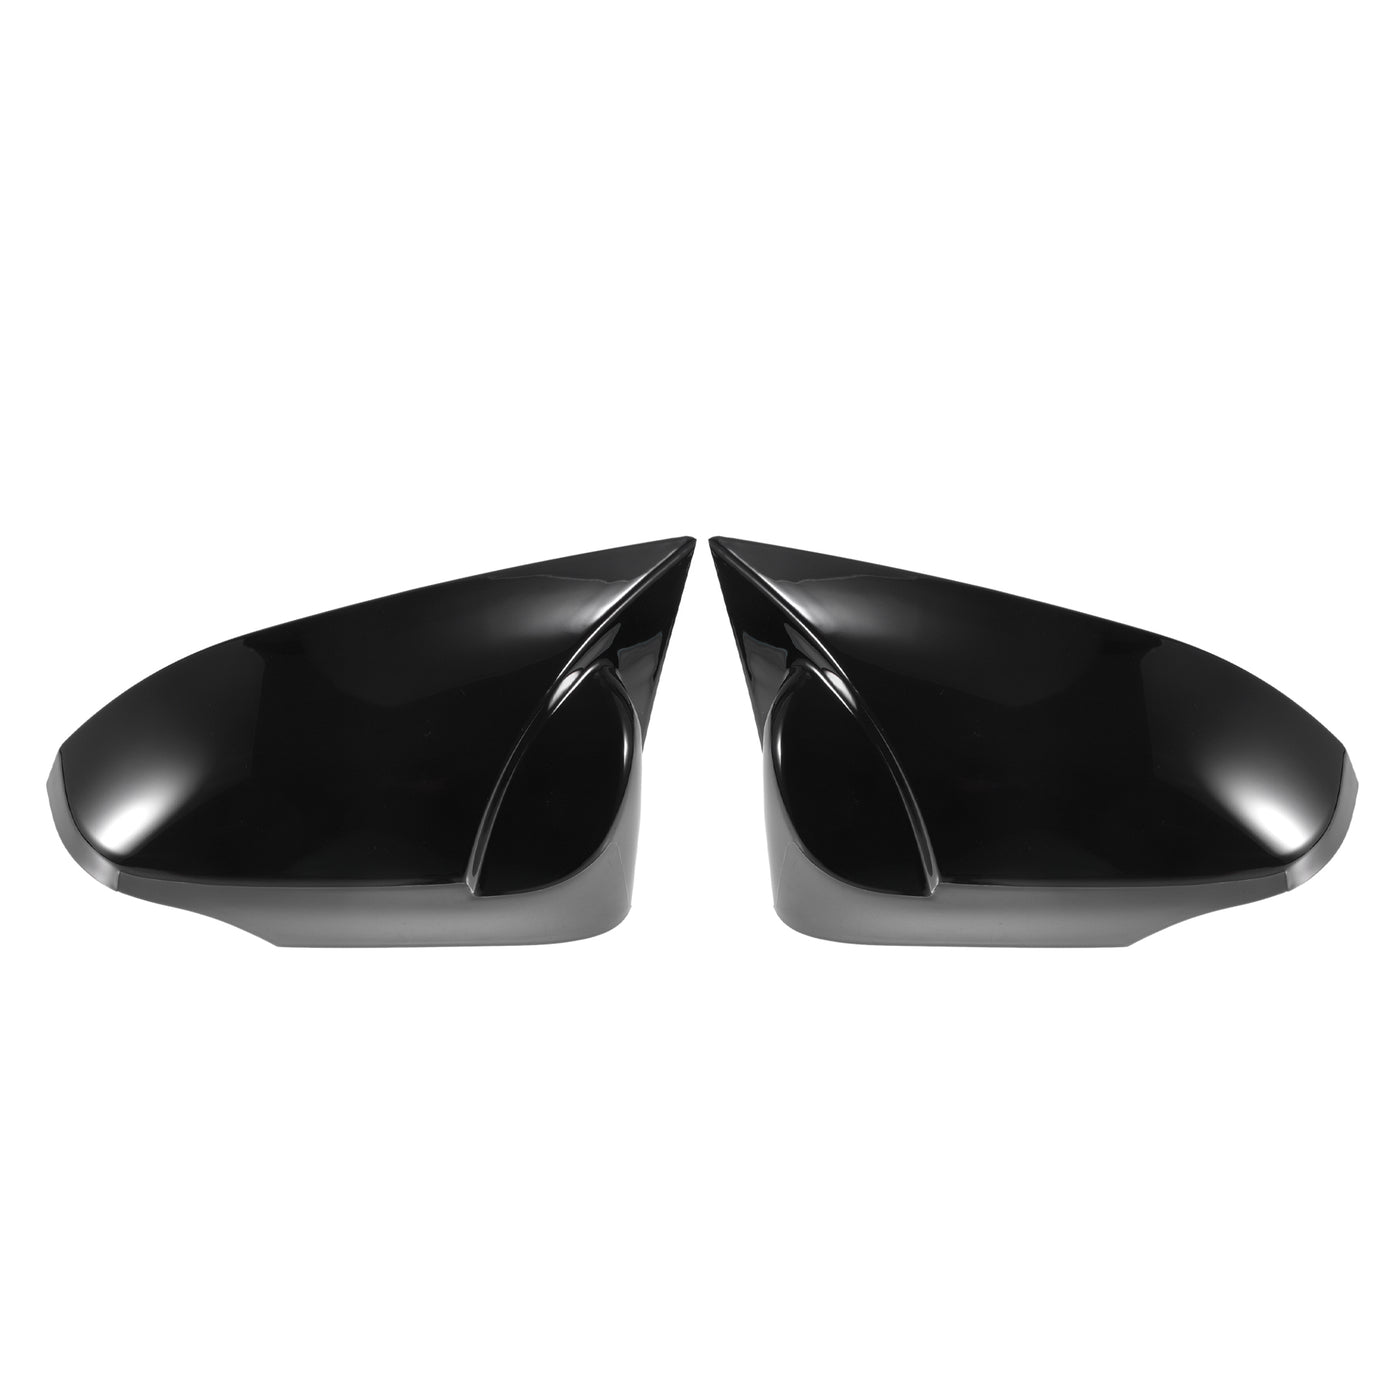 X AUTOHAUX 1 Pair Car Rear View Driver Passenger Side Mirror Cover Cap Overlay Gloss Black for Toyota Camry 12-17 for Toyota Venza Avalon Corolla Yaris Mirror Guard Covers Exterior Decoration